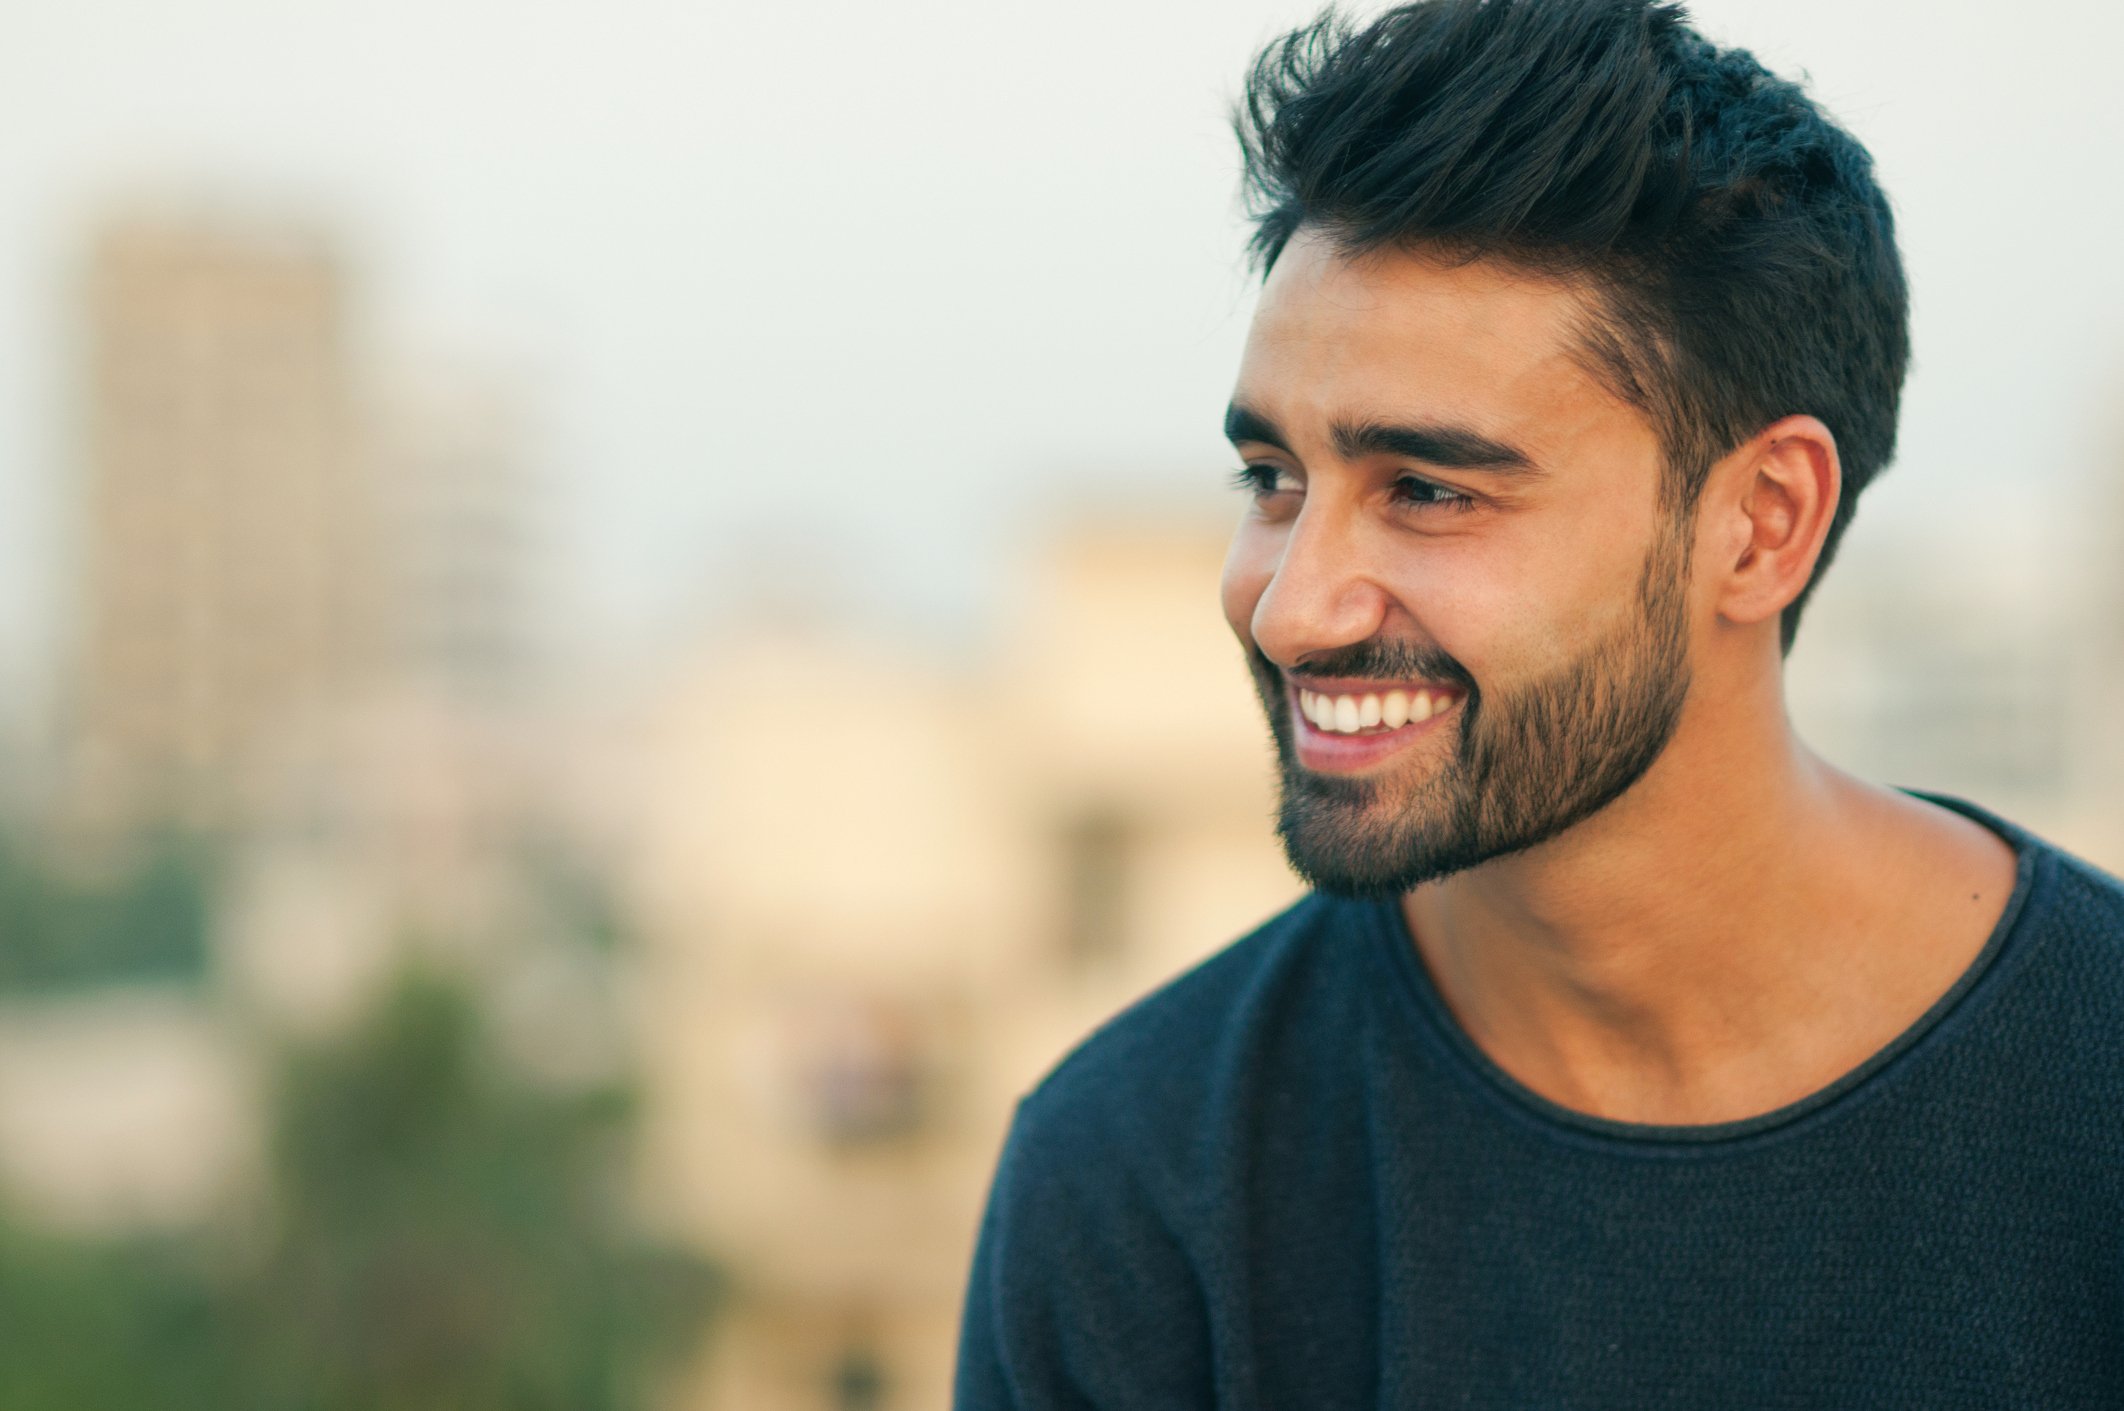 Smiling Asian man with short defined beard 